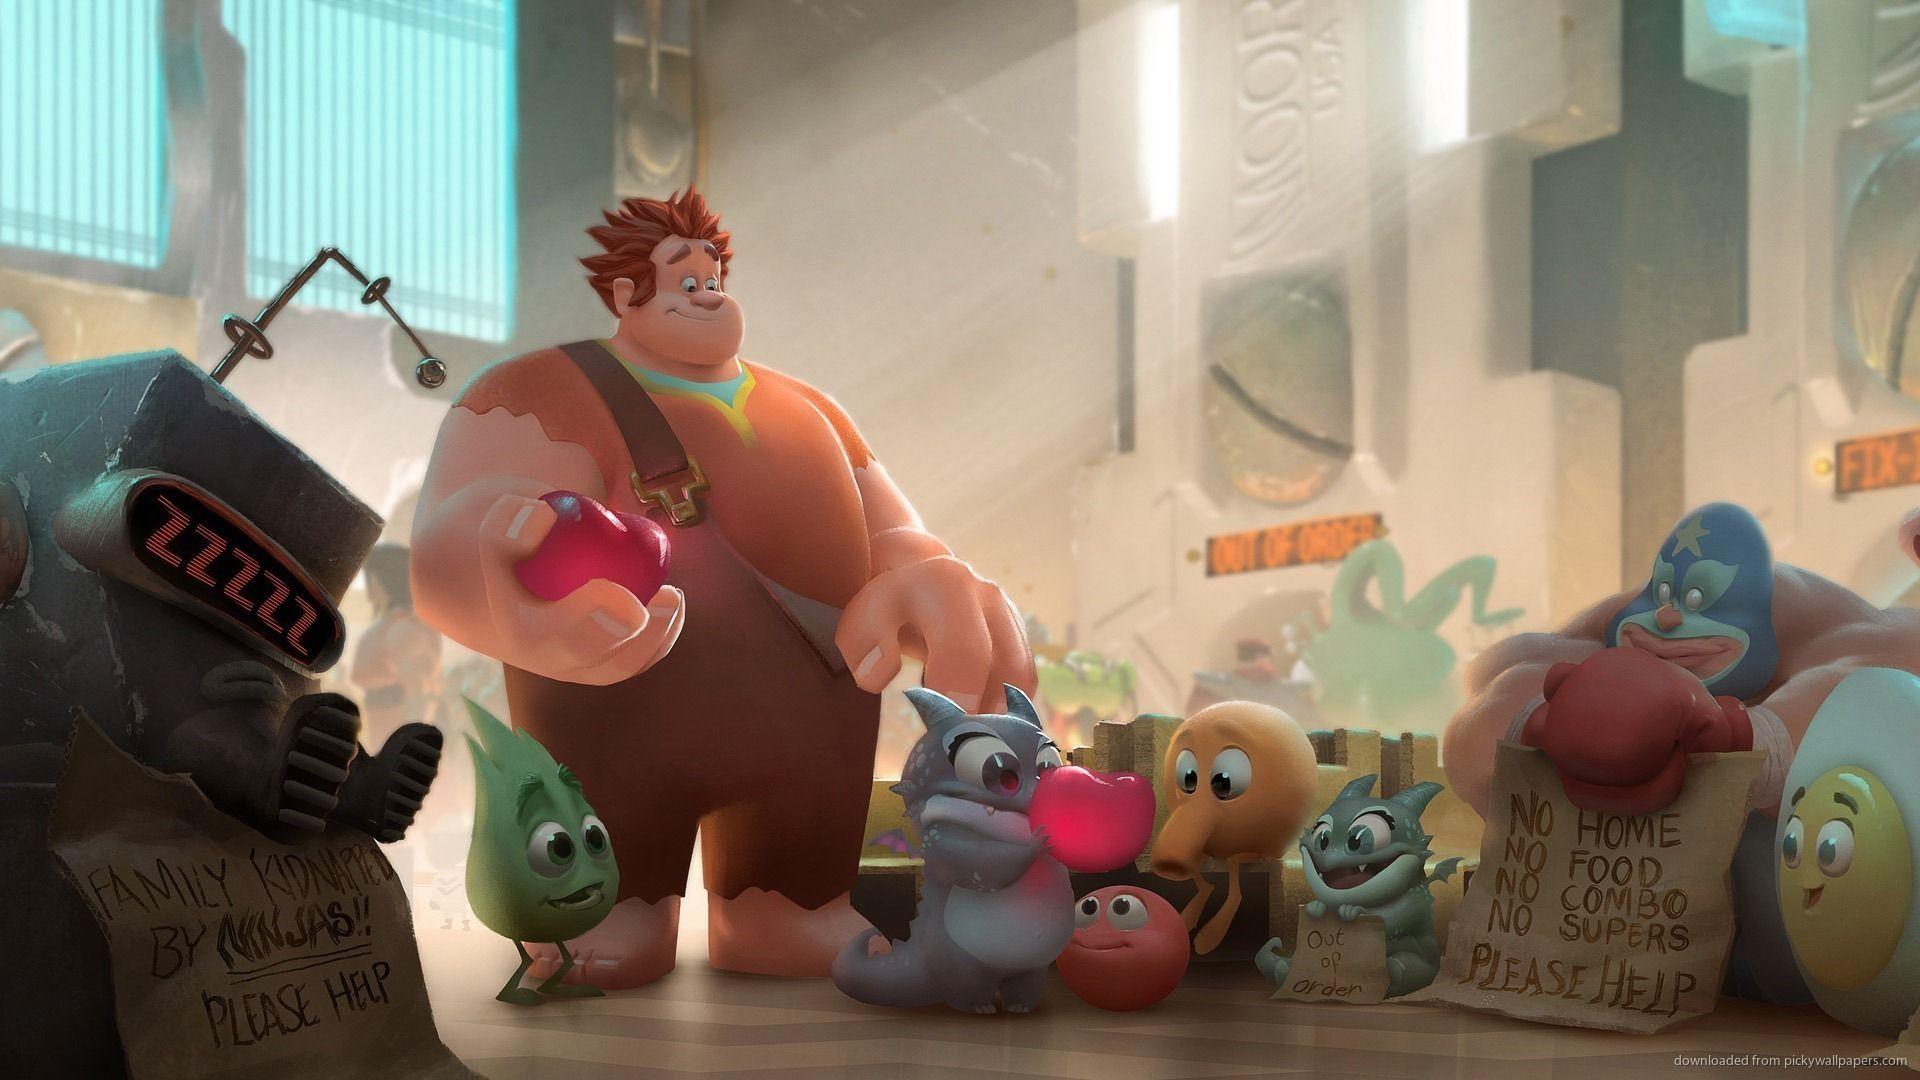 Wreck It Ralph Wallpaper Picture For iPhone, Blackberry, iPad